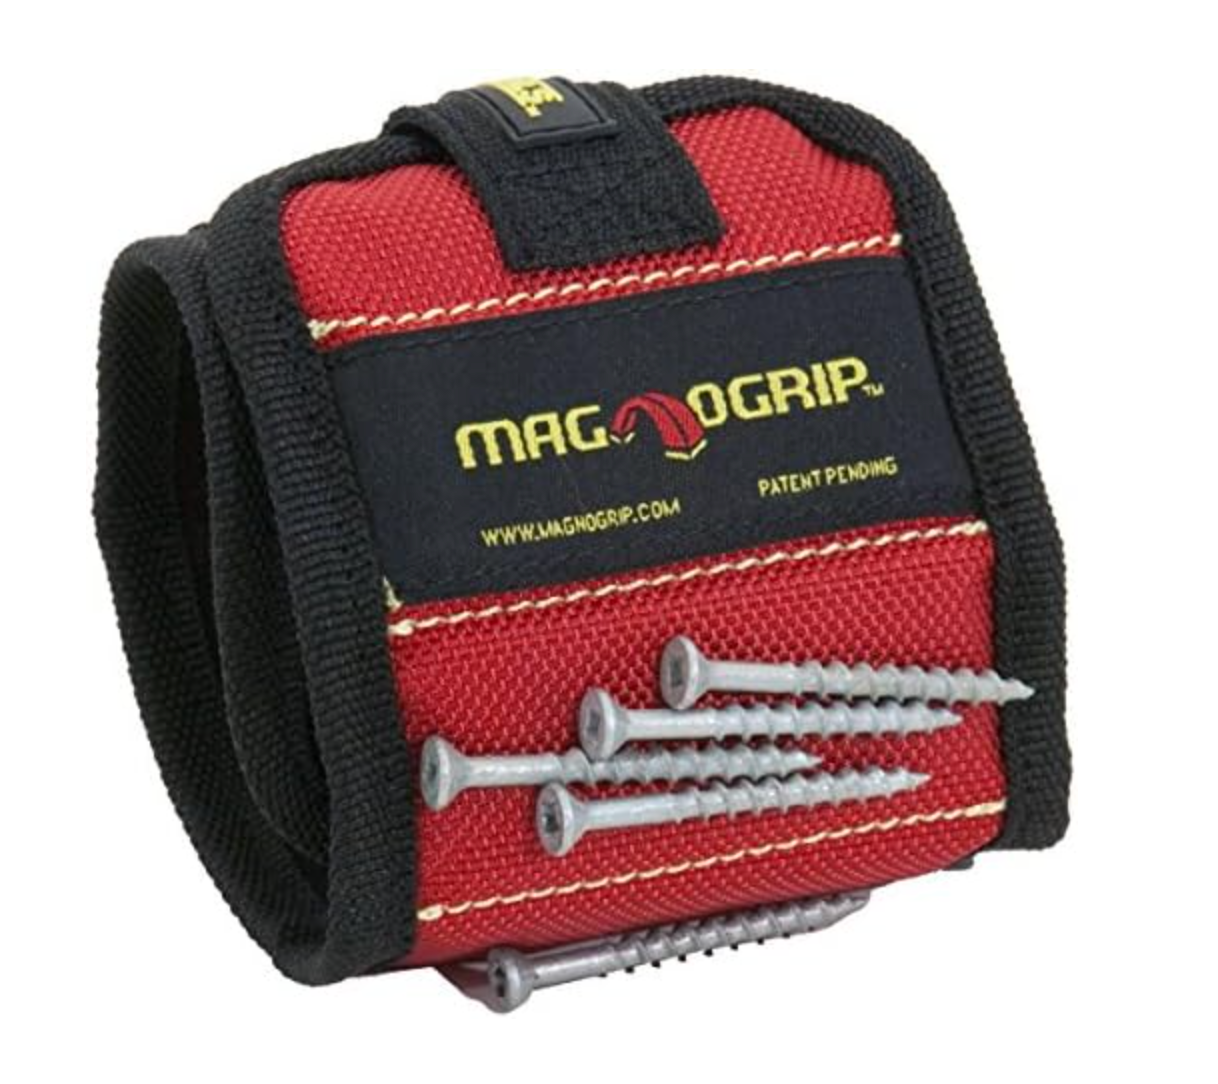 MagnoGrip 311-090 Magnetic Wristband, Red - $18.80